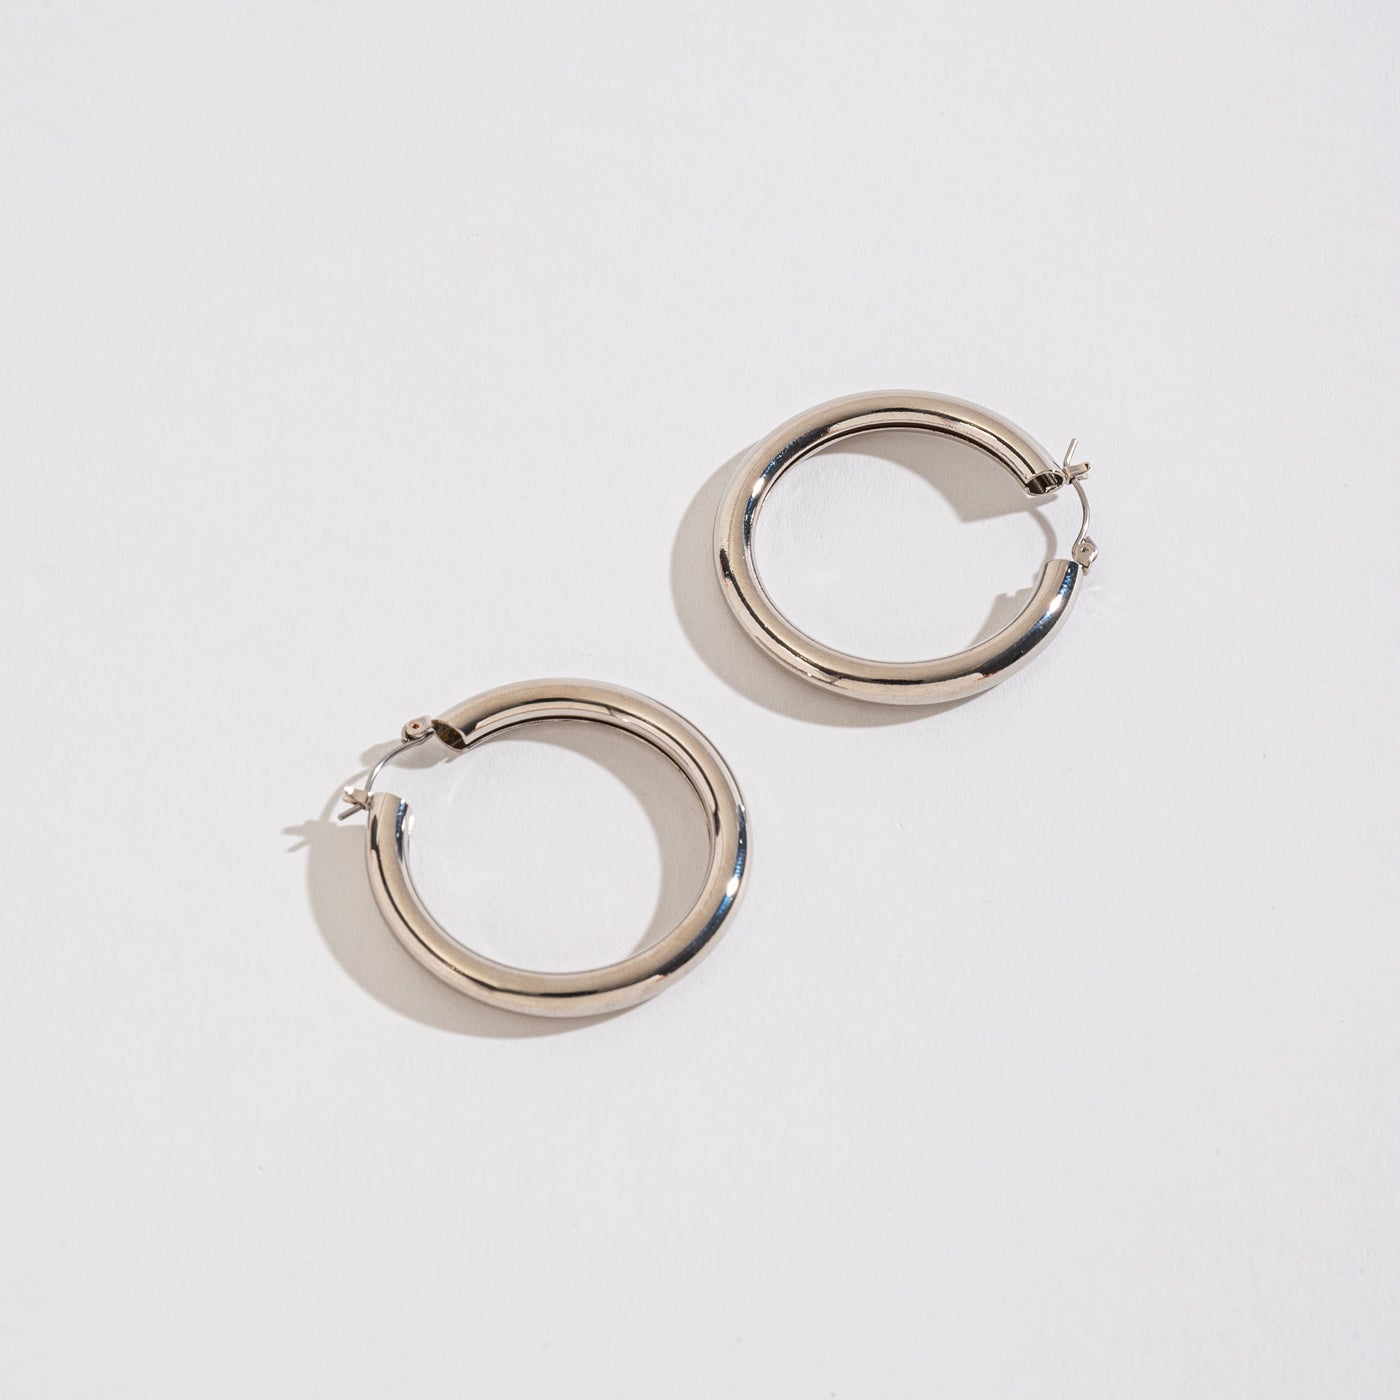 silver tube hoops on a white background.